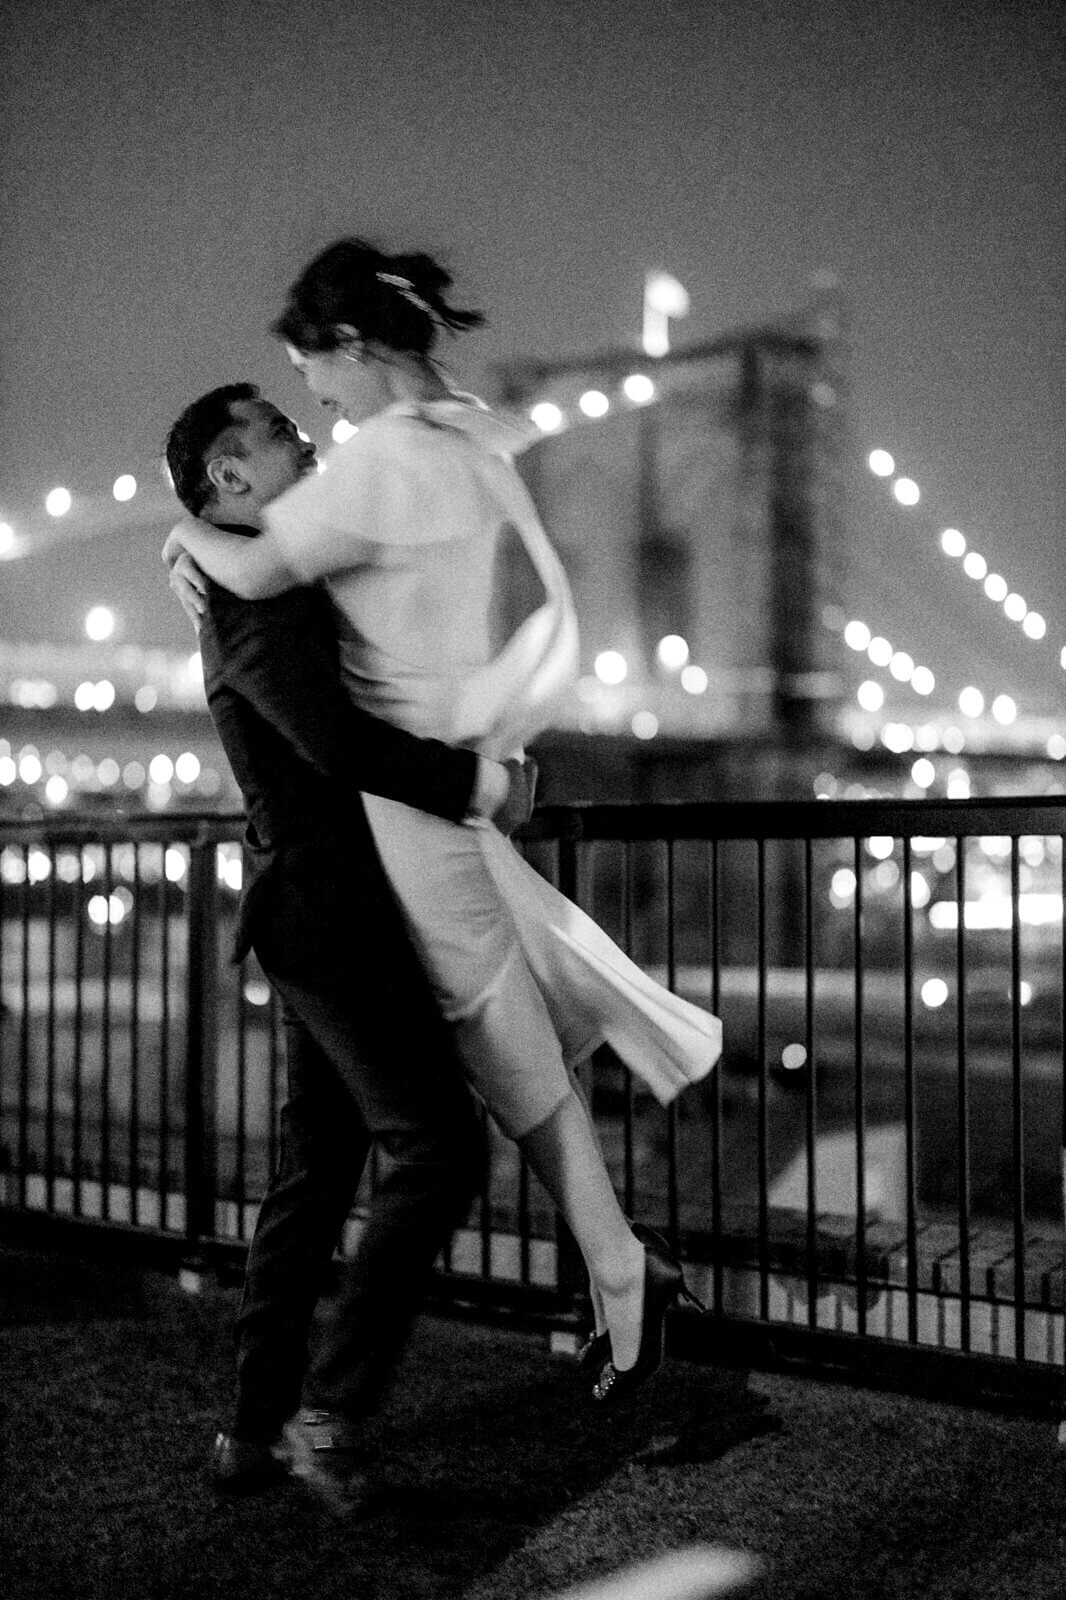 A night view of the groom carrying the bride on a veranda overlooking the Brooklyn Bridge.